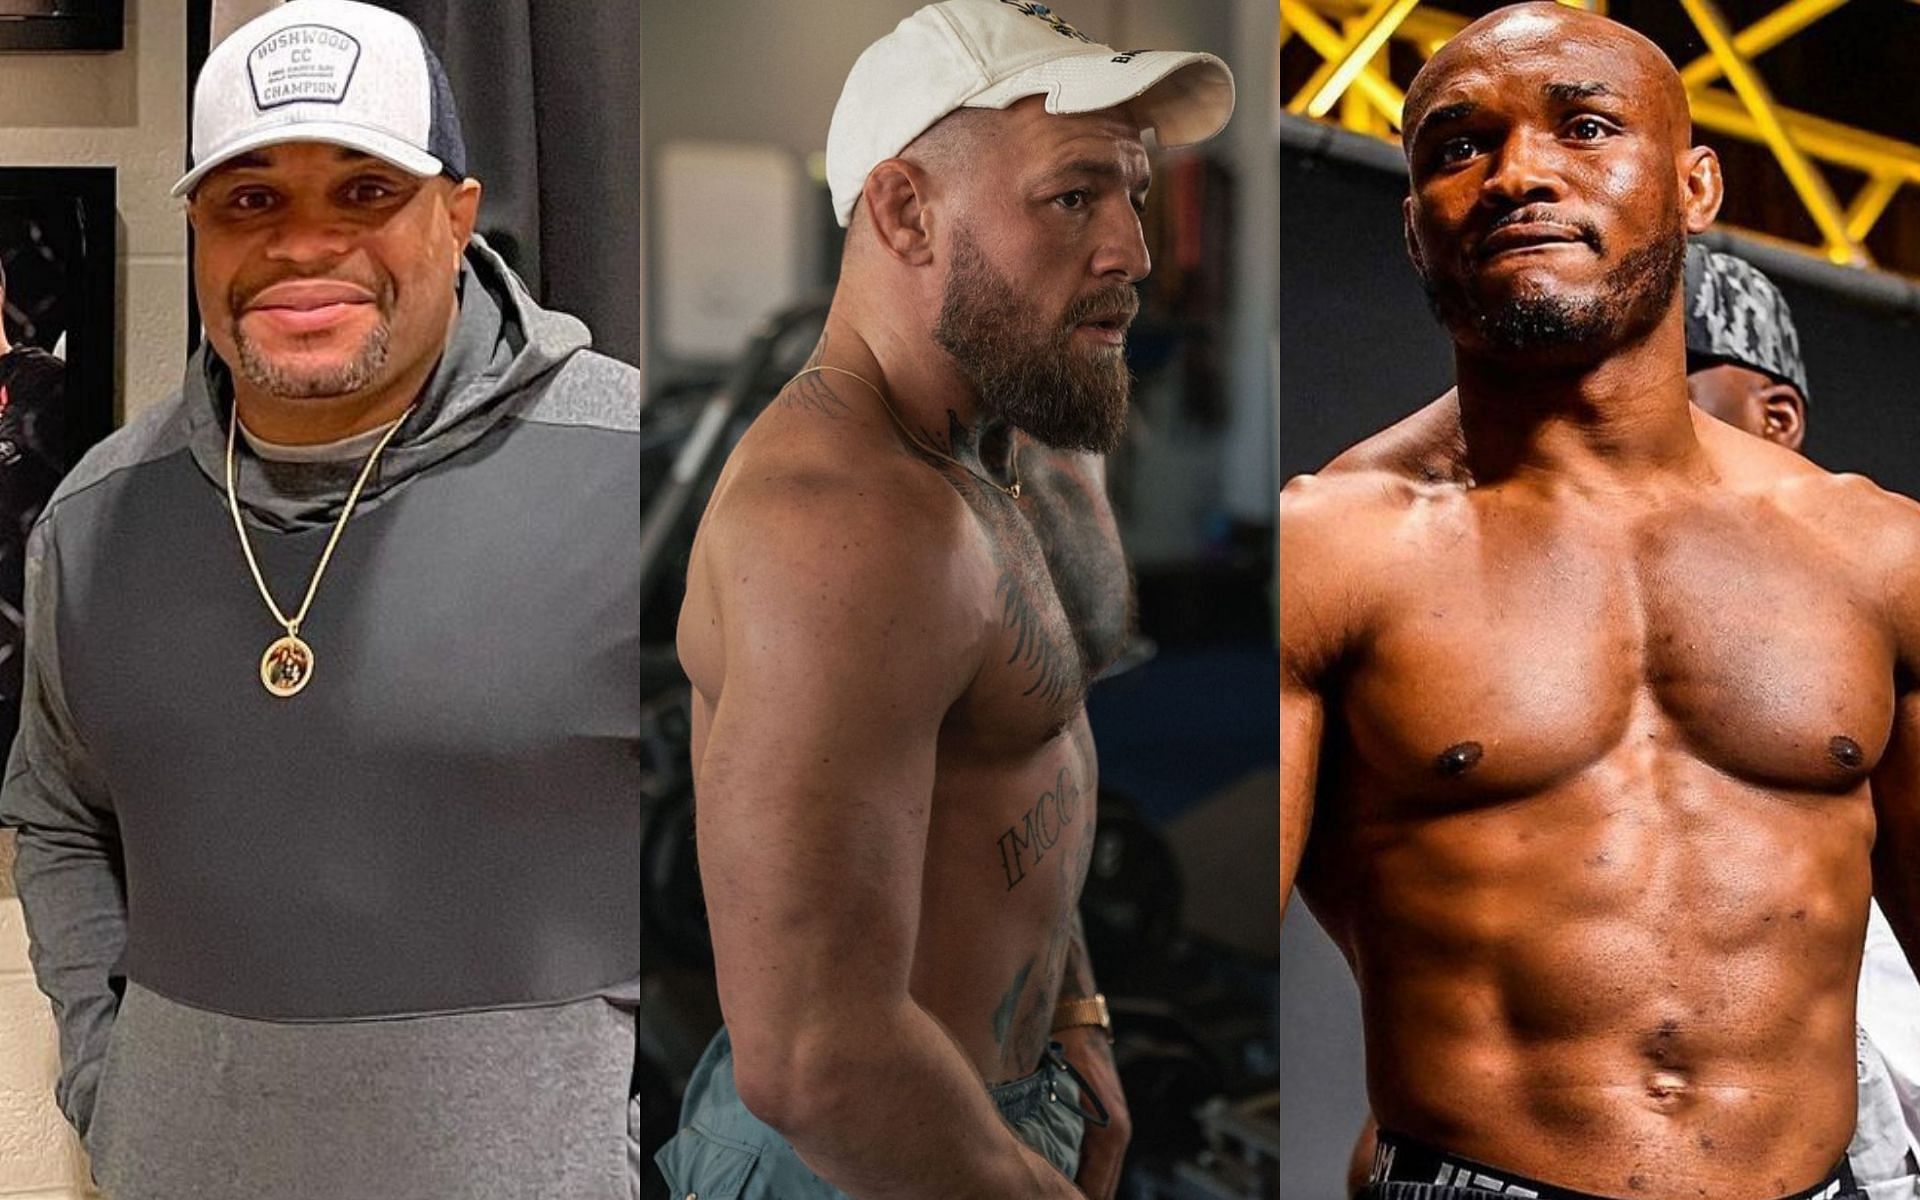 (L to R) Daniel Cormier, Conor McGregor and Kamaru Usman [Images via @dc_mma, @thenotoriousmma and @usman84kg on Instagram respectively]